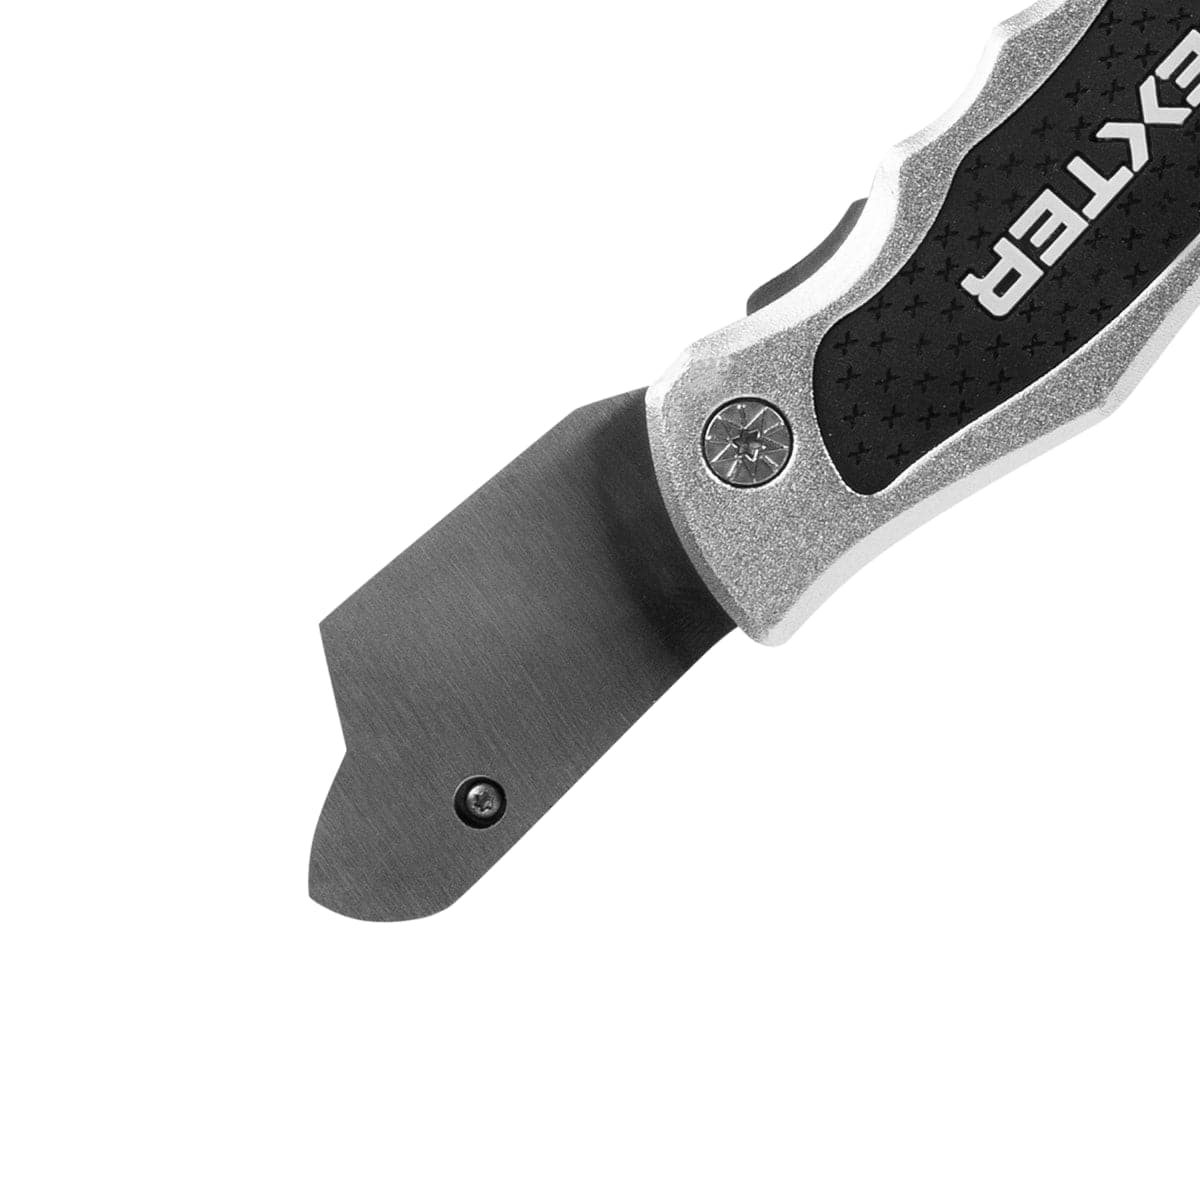 DXT Pocket knife with 5 blades